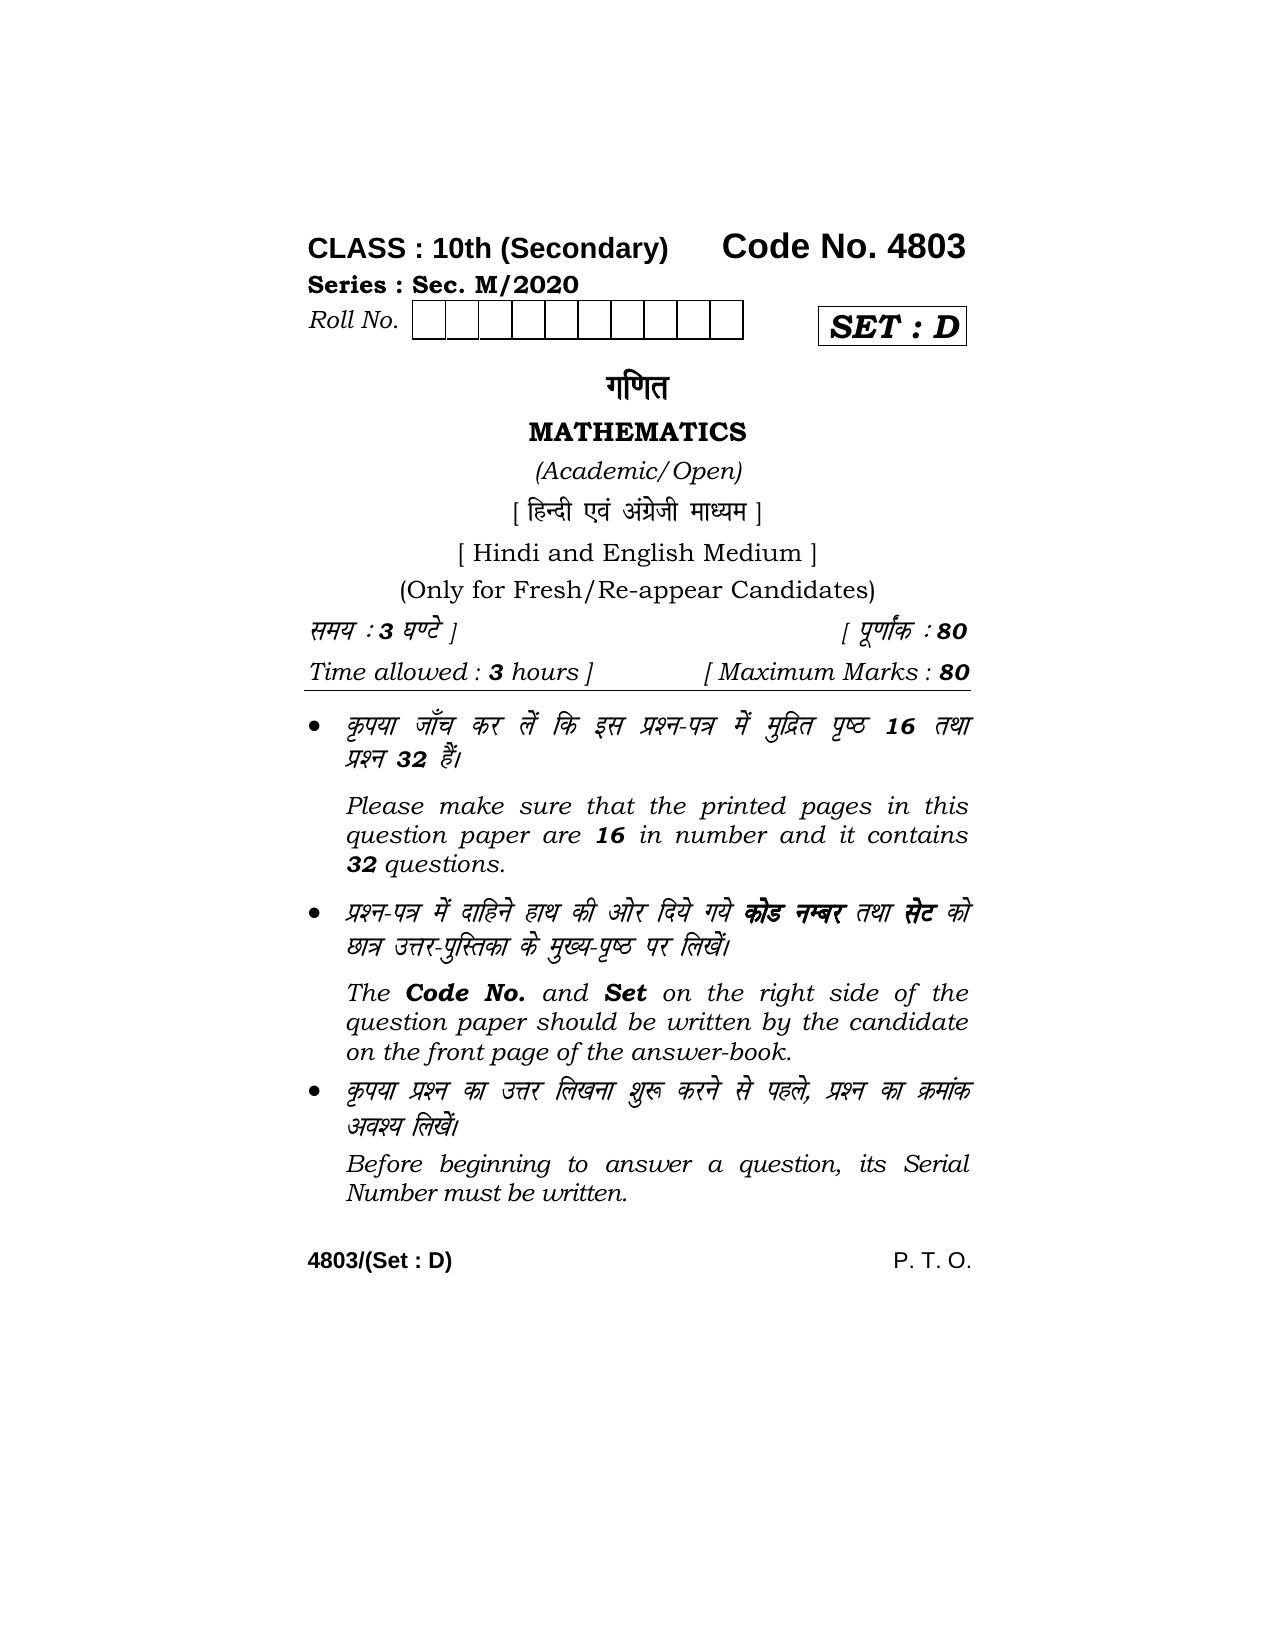 Haryana Board HBSE Class 10 Mathematics 2020 Question Paper - Page 49